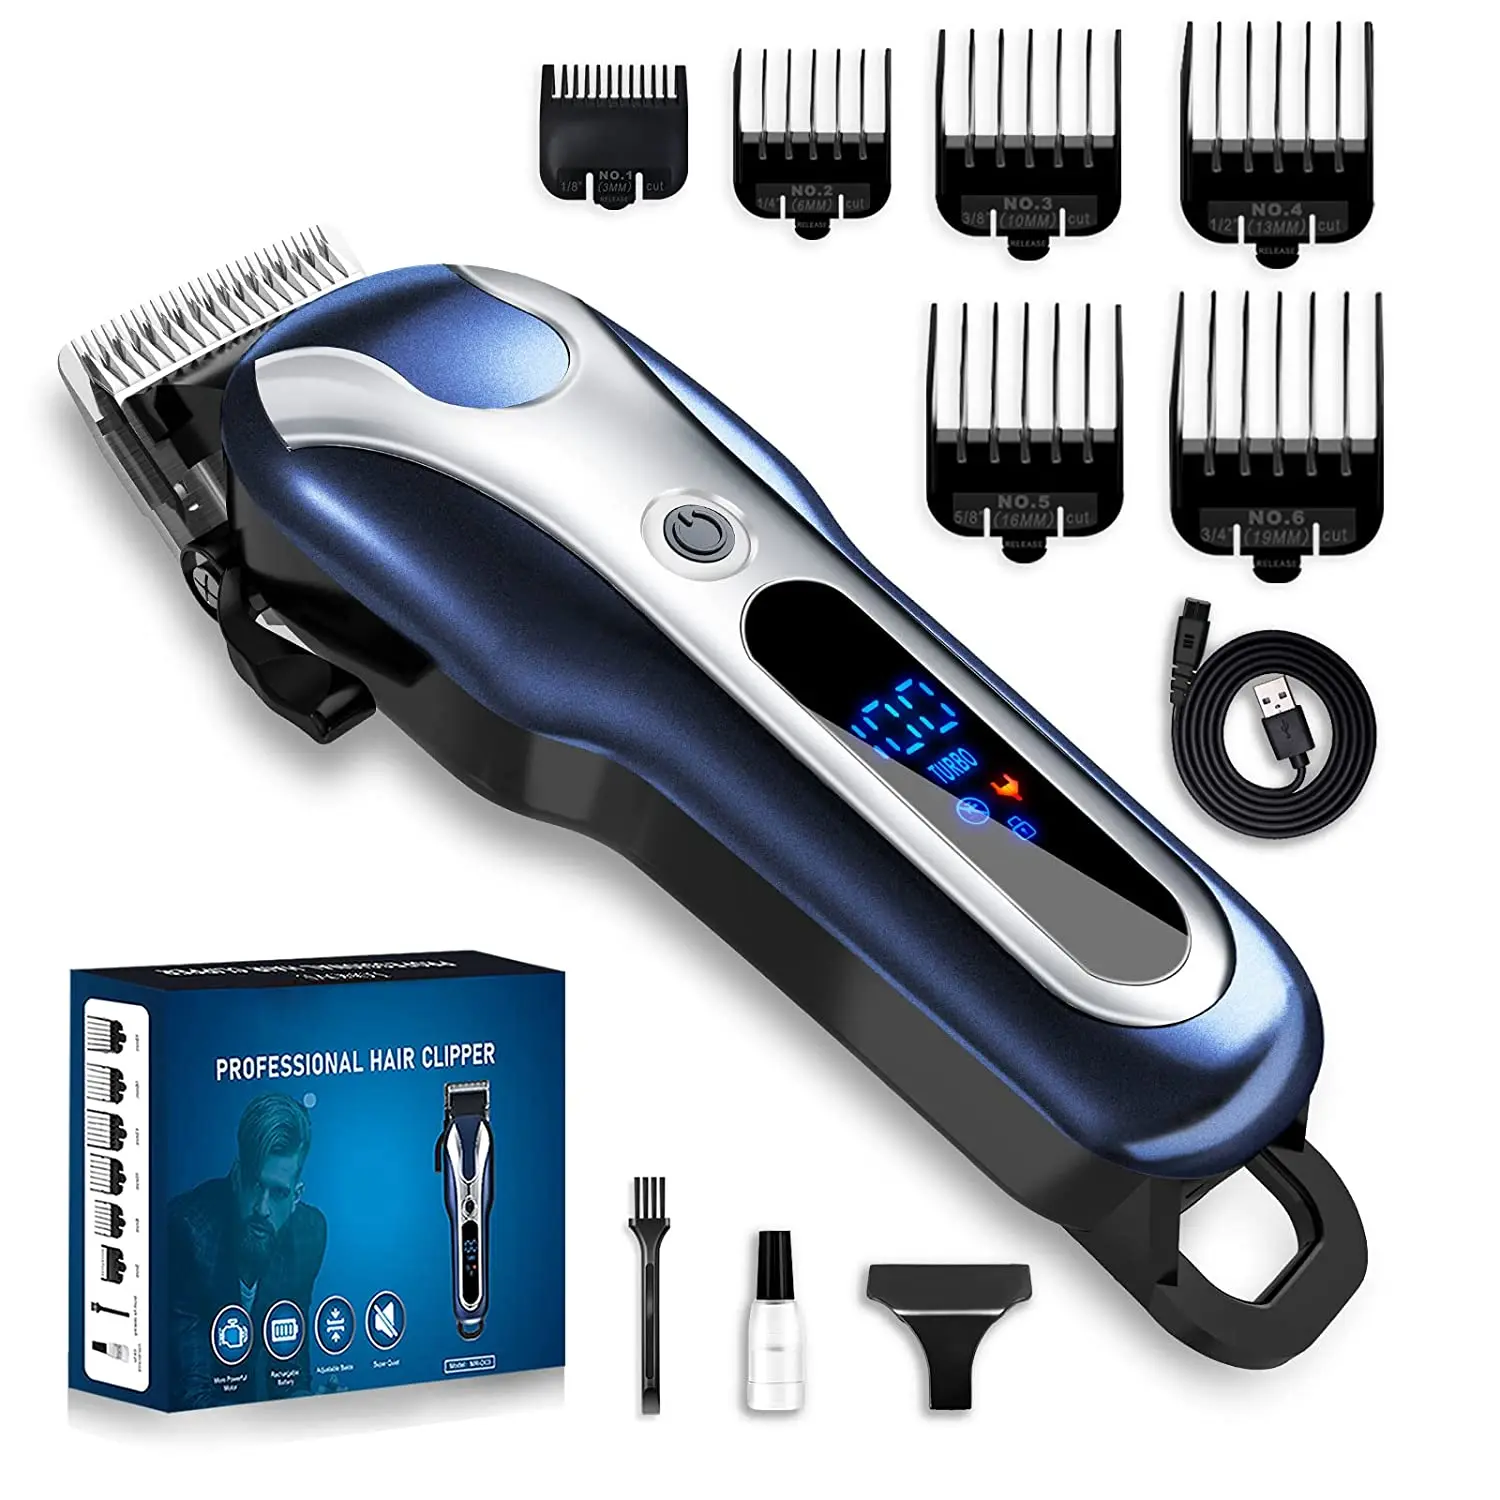 Maxshop Professional Hair Clippers for Men and Babies Quiet Clippers Cordless Haircut kit with Charging Dock, Comb Guides, Scissors,1 Hair並行輸入